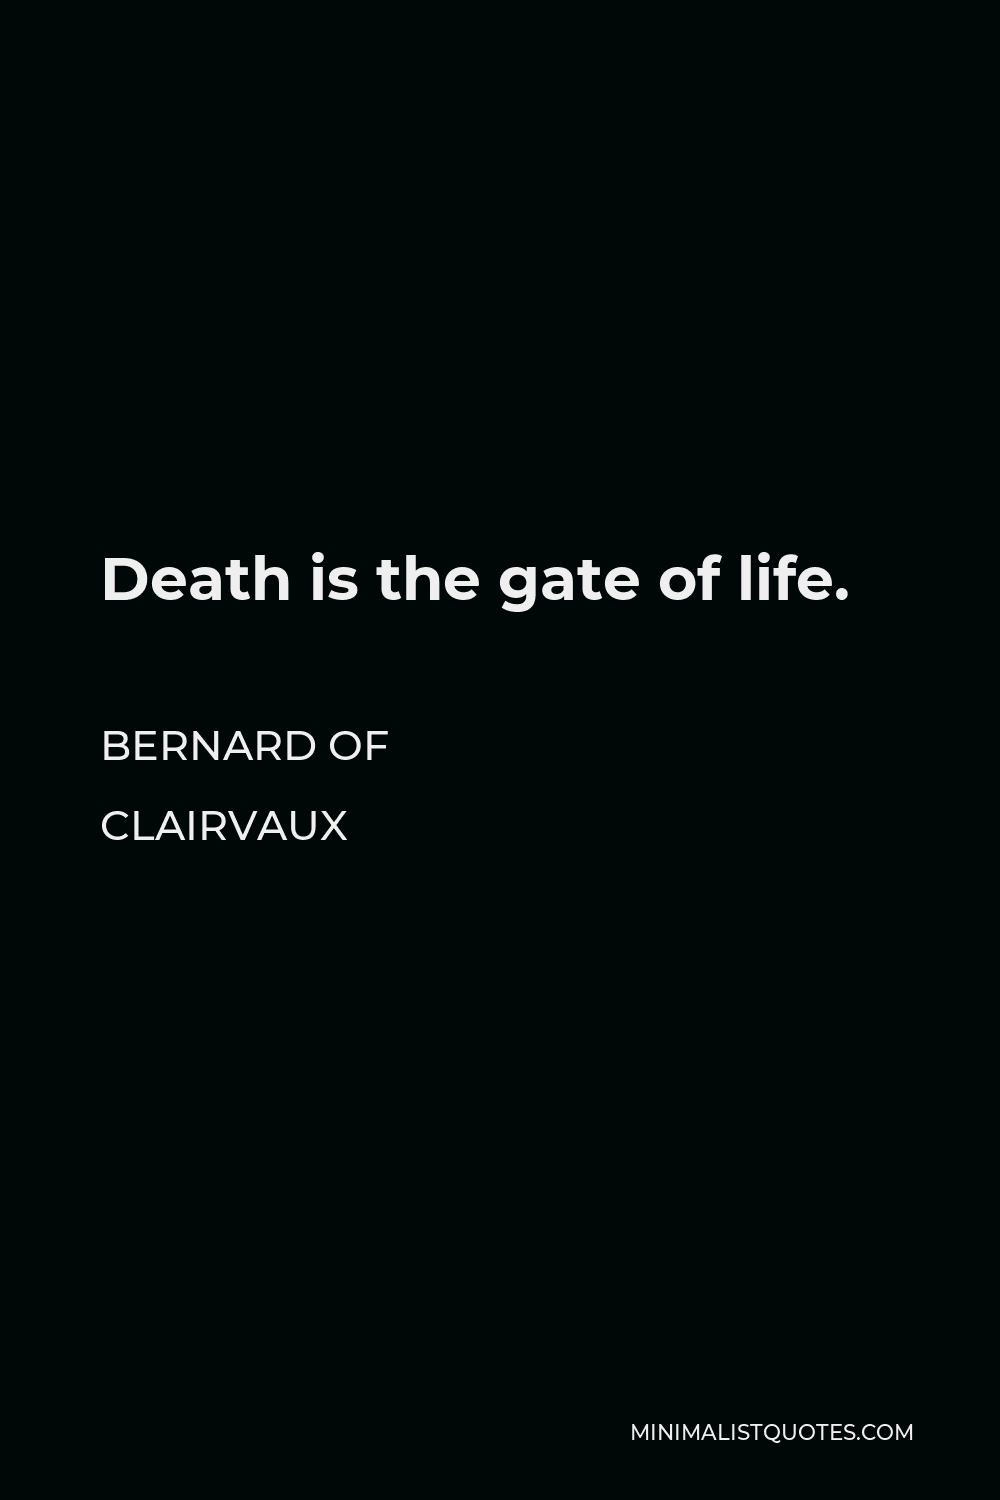 Bernard of Clairvaux Quote - Death is the gate of life.